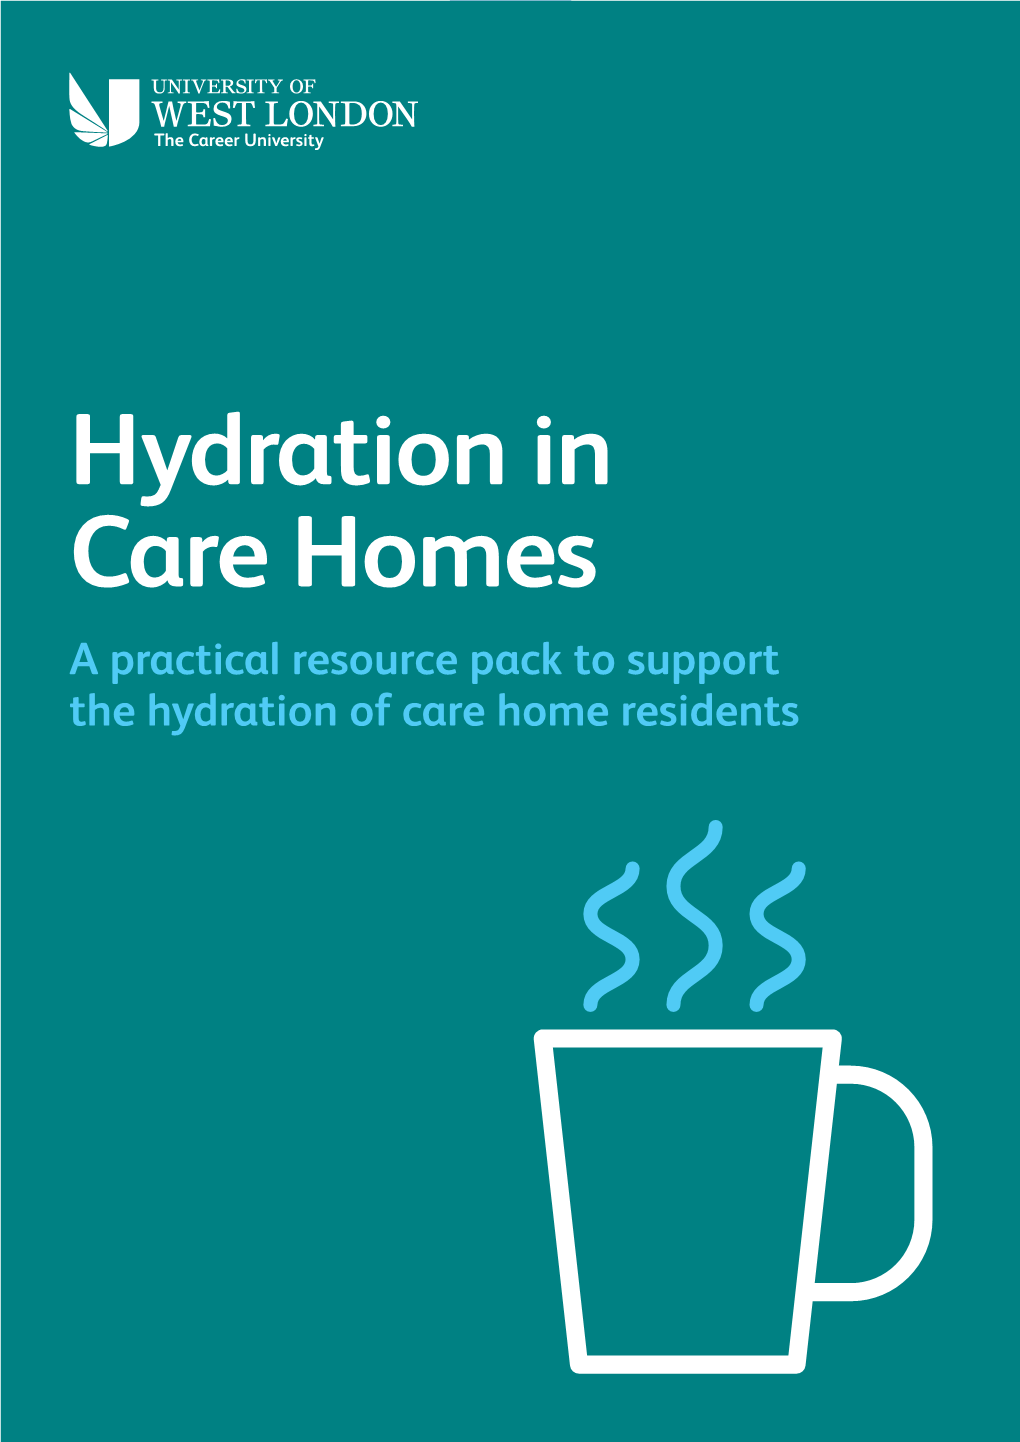 Hydration in Care Homes a Practical Resource Pack to Support the Hydration of Care Home Residents I-Hydrate 2